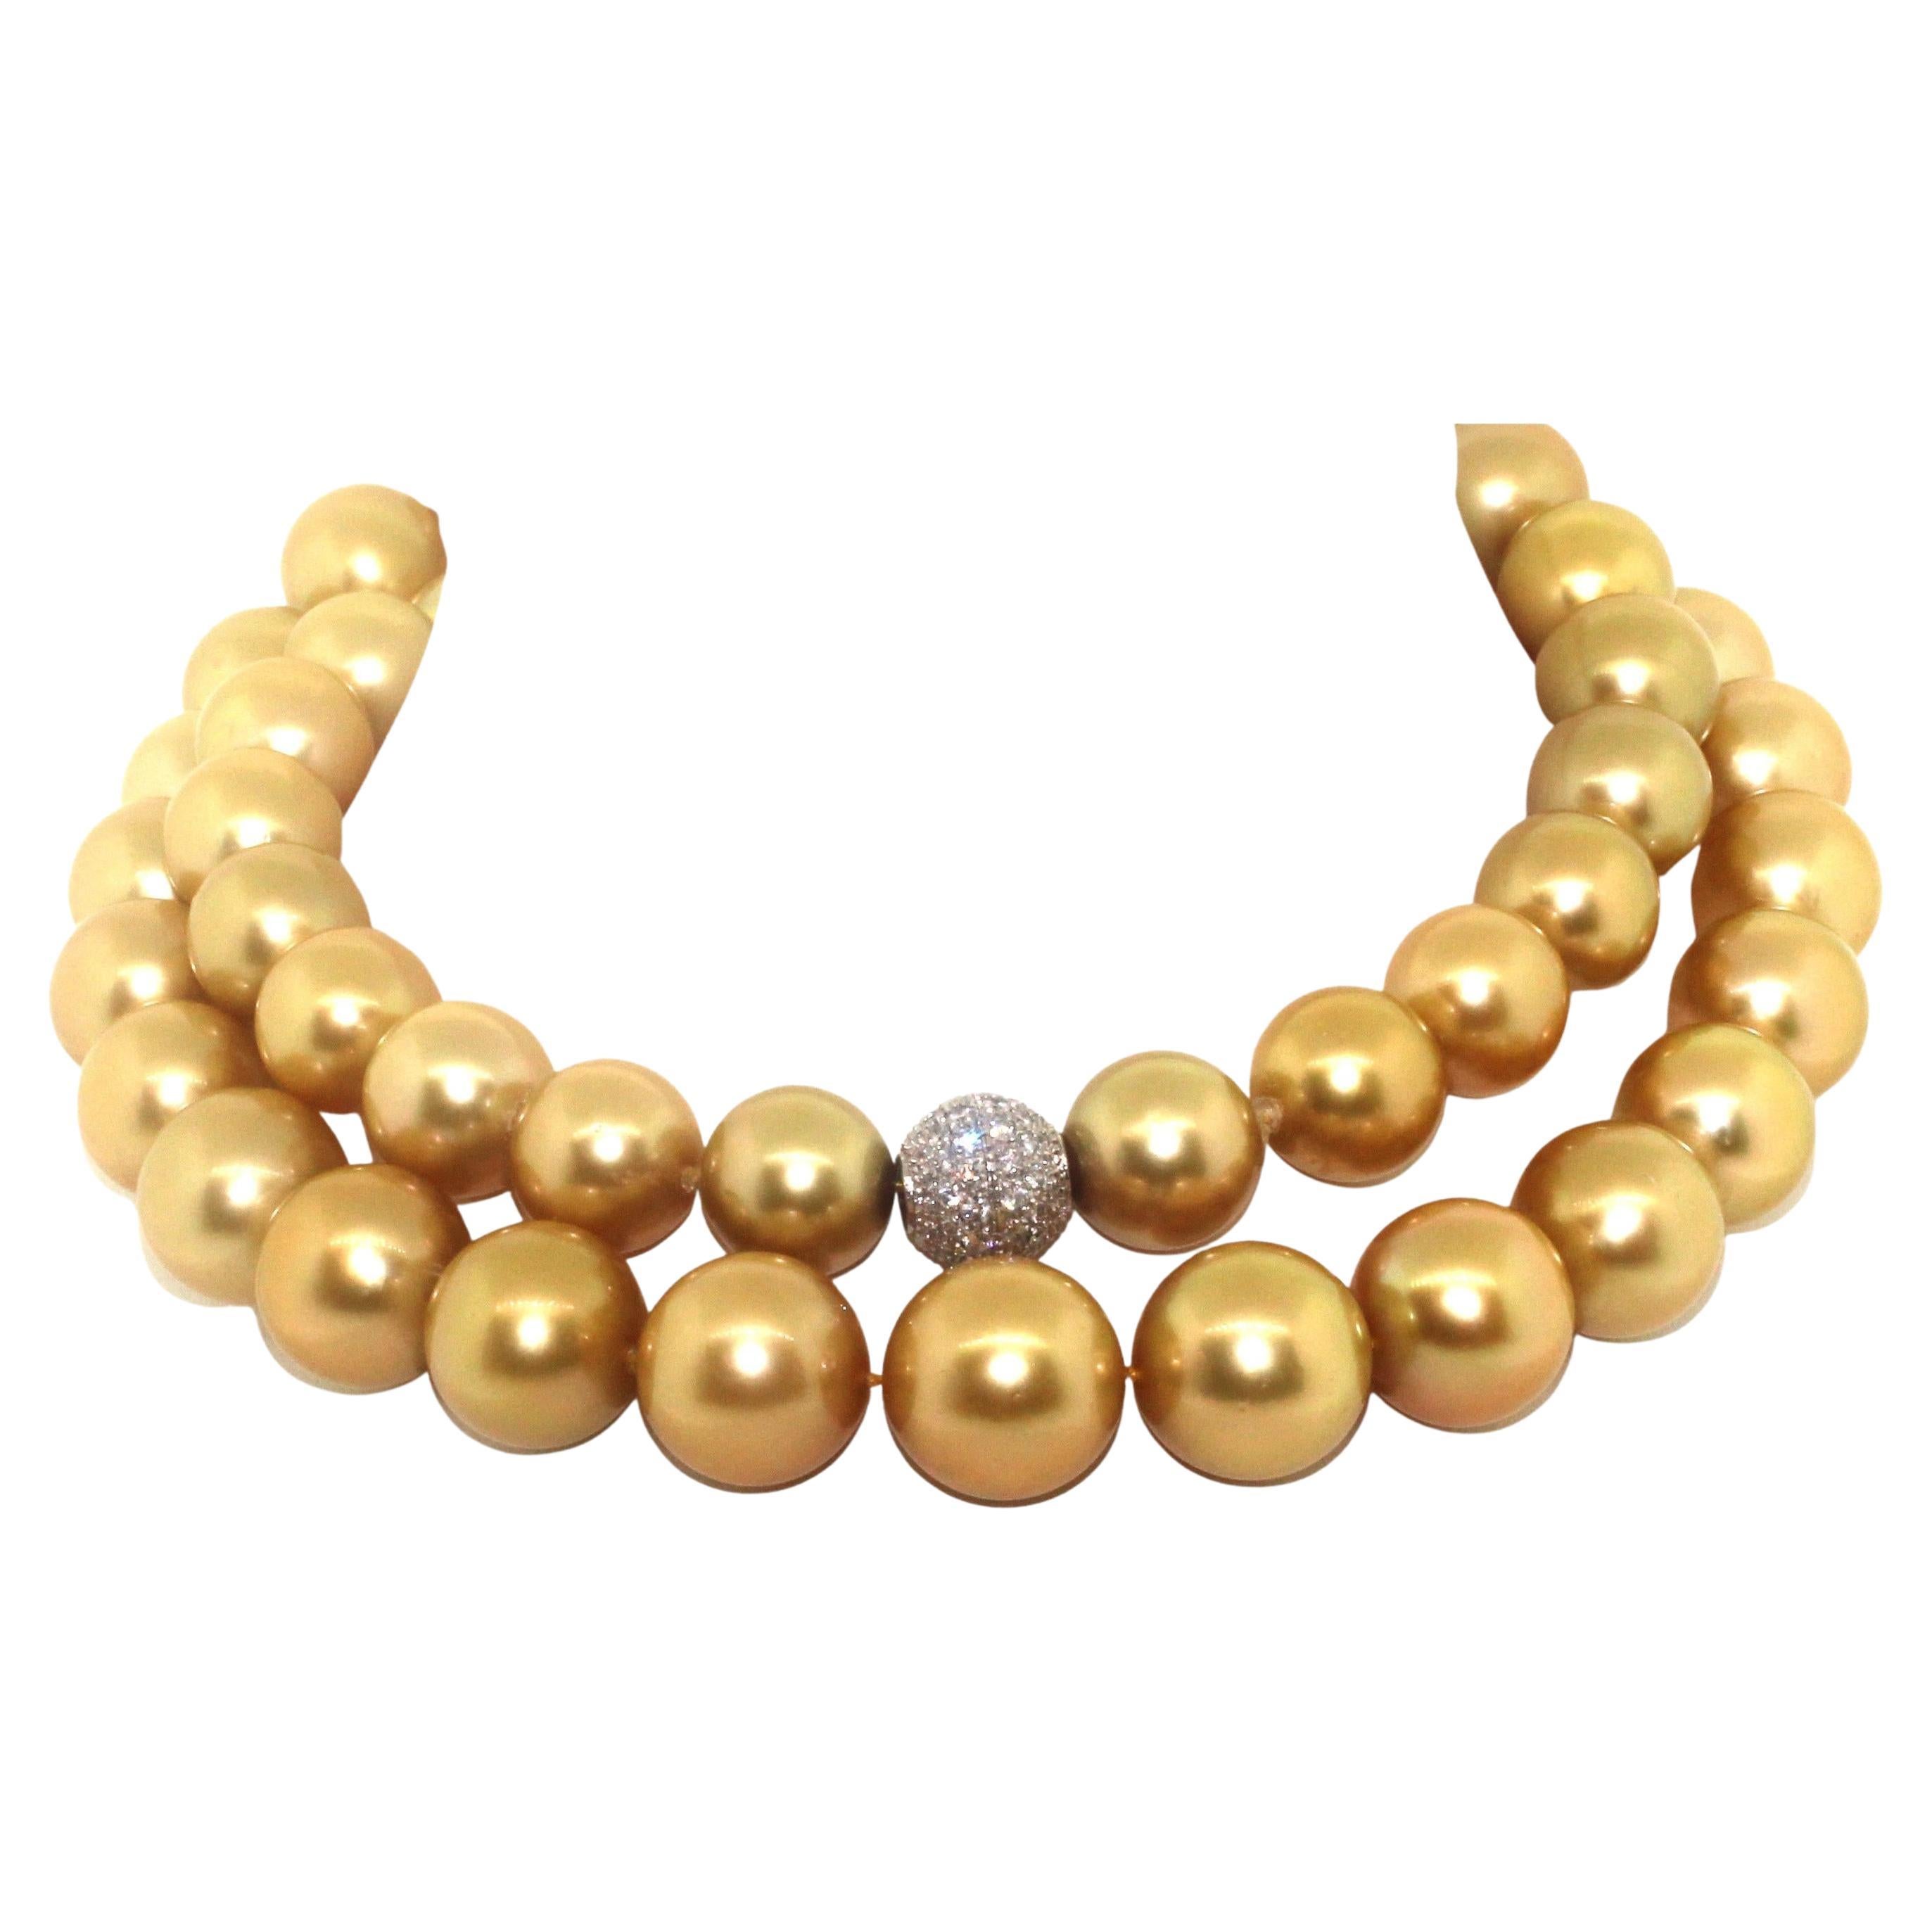 Hakimoto 14x17mm 49 Deep Intense Natural Golden Color South Sea Pearl Necklace For Sale